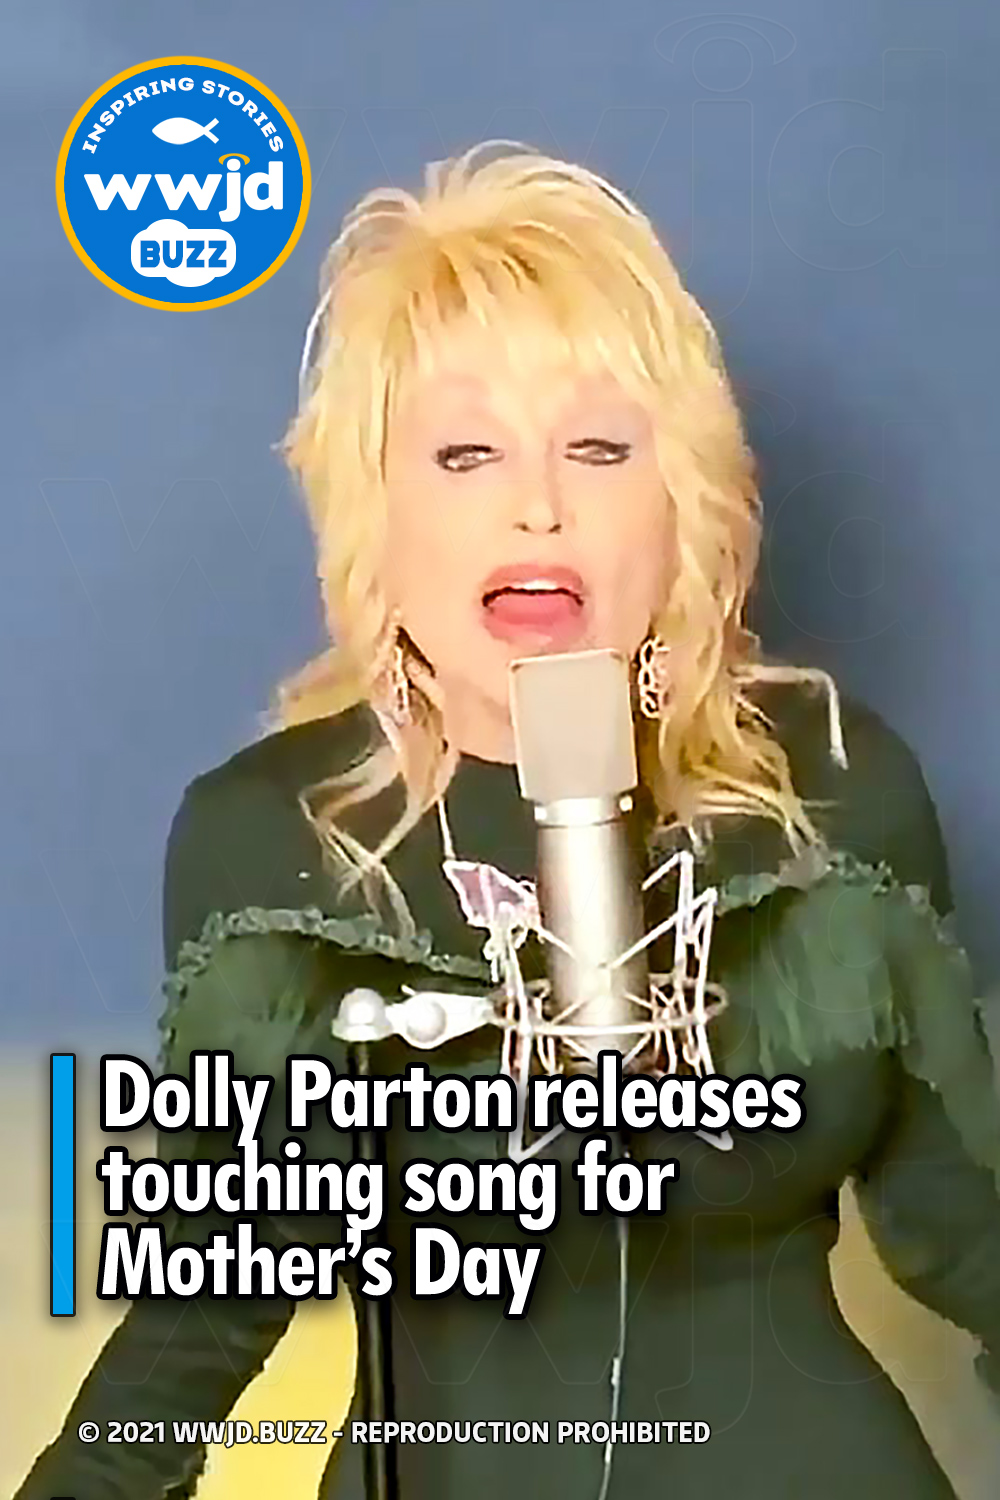 Dolly Parton releases touching song for Mother’s Day